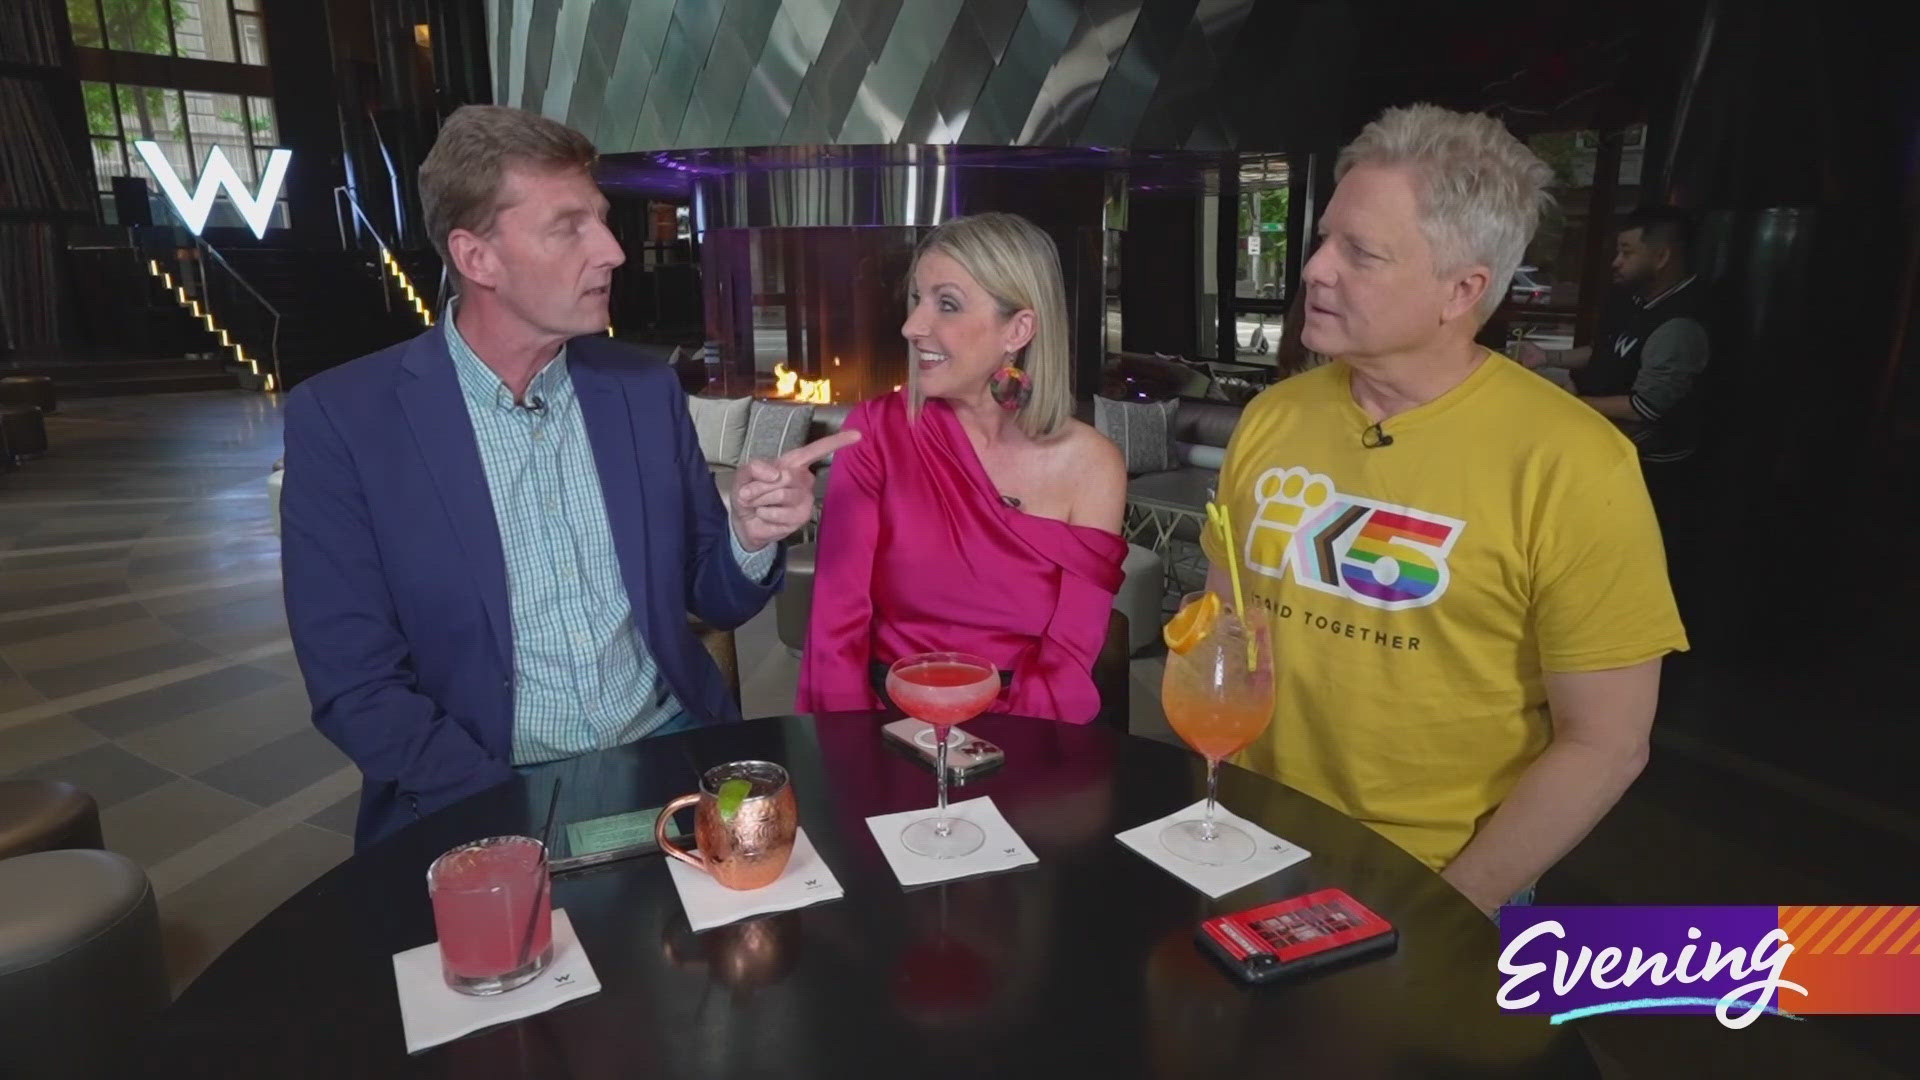 Evening hosts rave about their recent obsessions including Martin Short, movies and new exercises. #k5evening